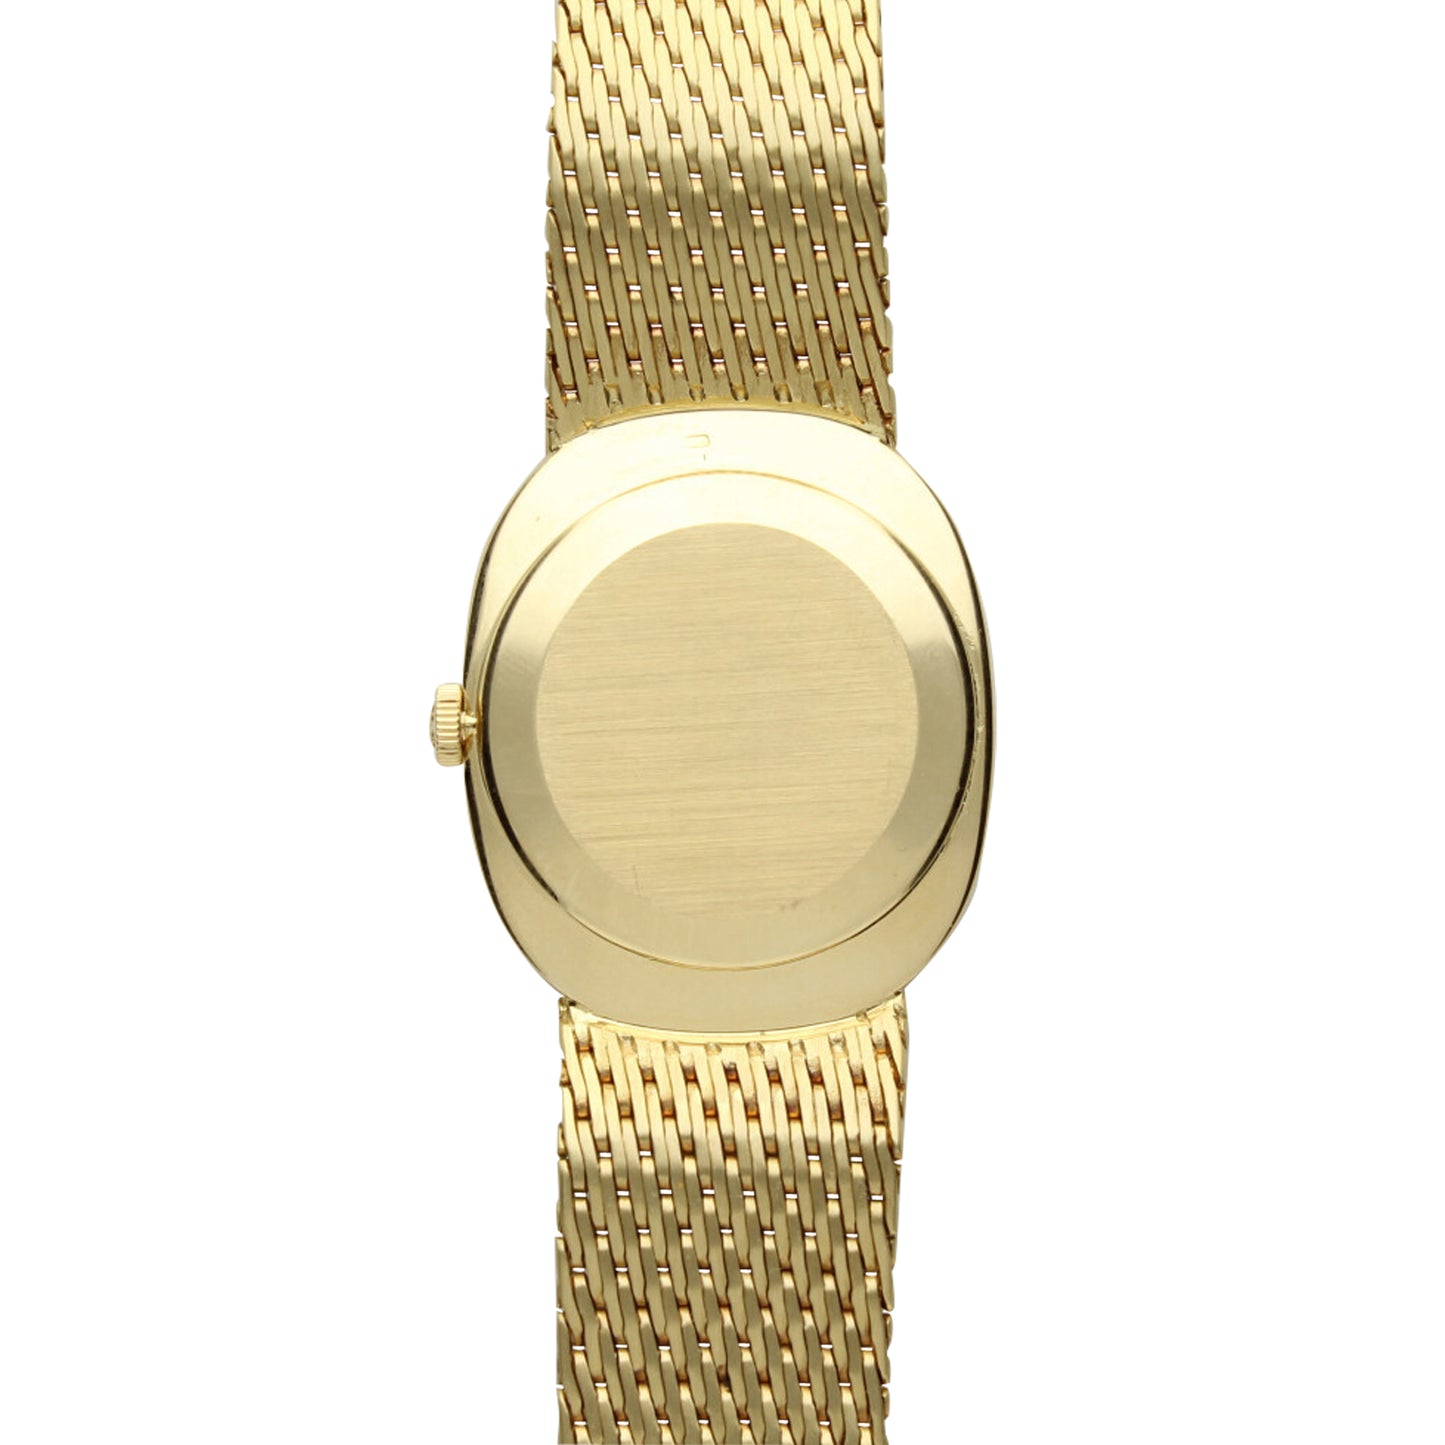 18ct yellow gold, reference 3548 'Ellipse' bracelet watch. Made 1974